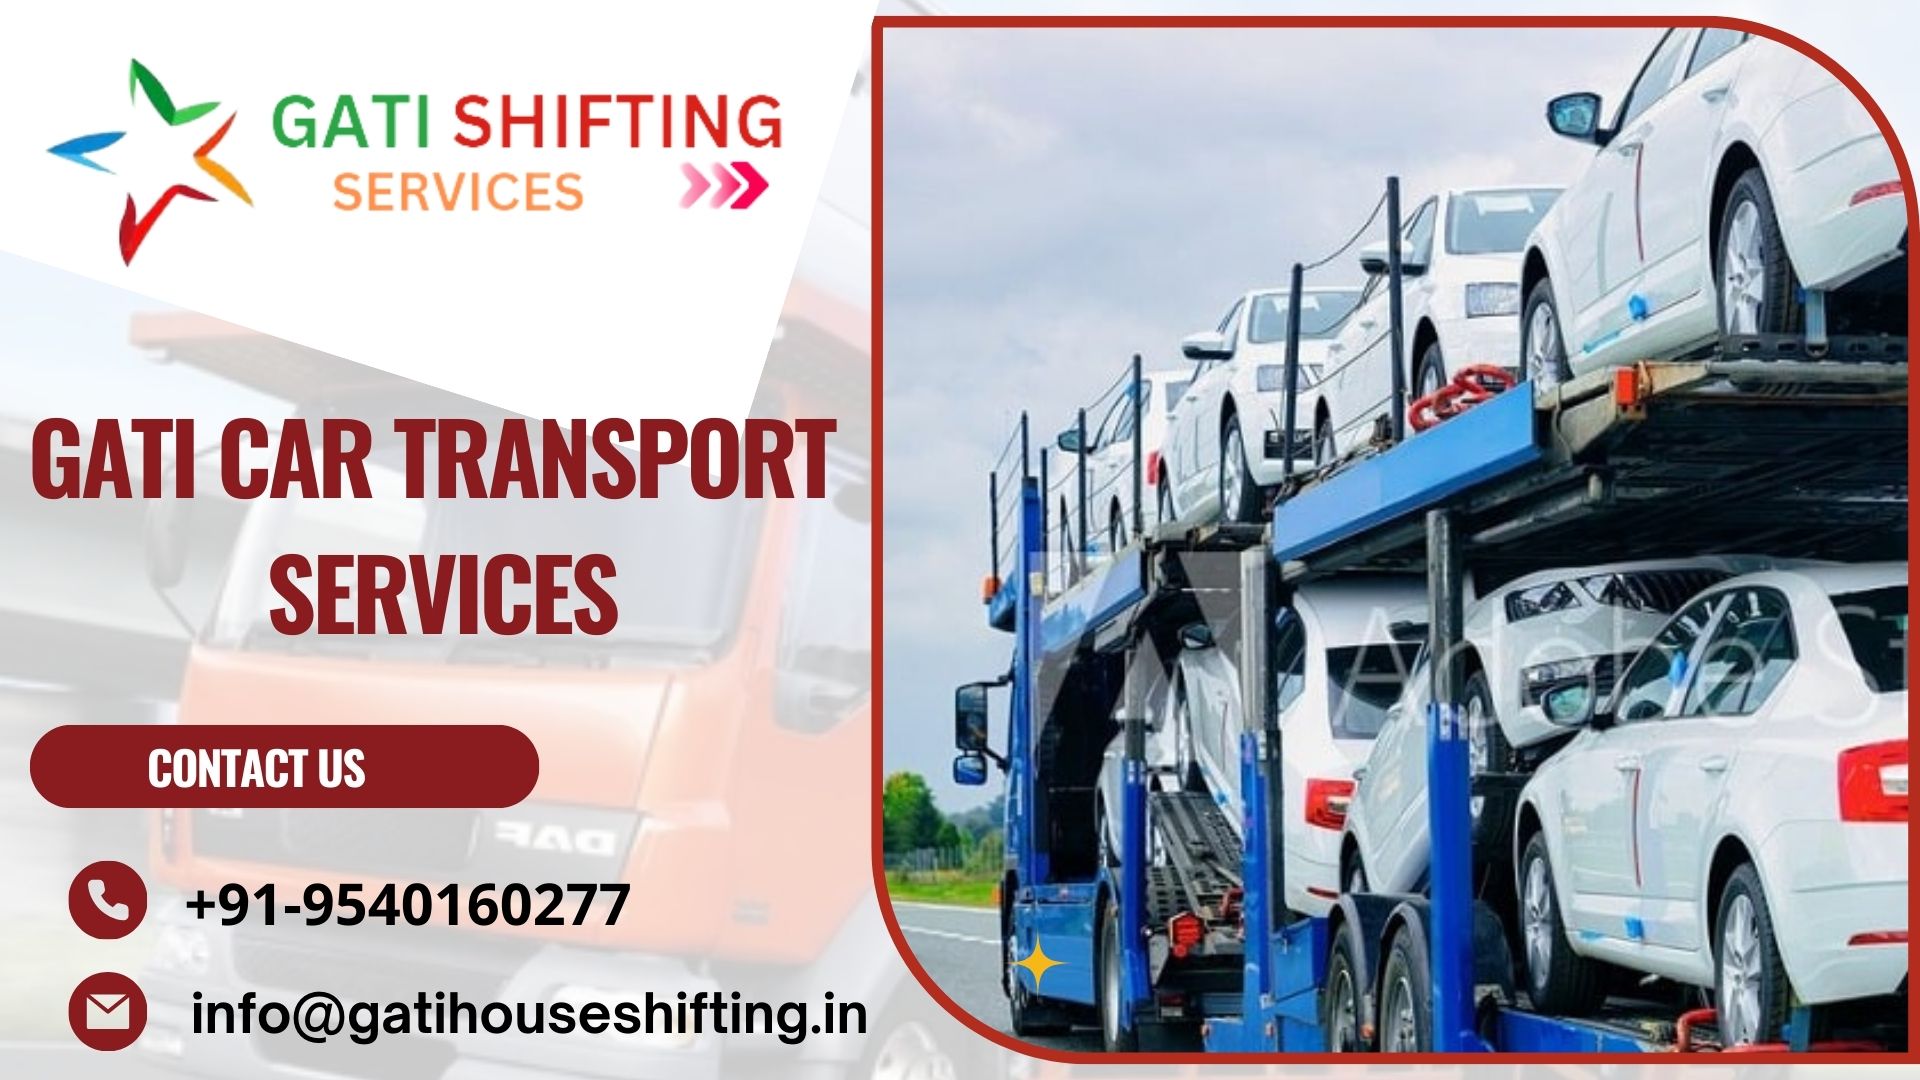 Car transport services in Chennai